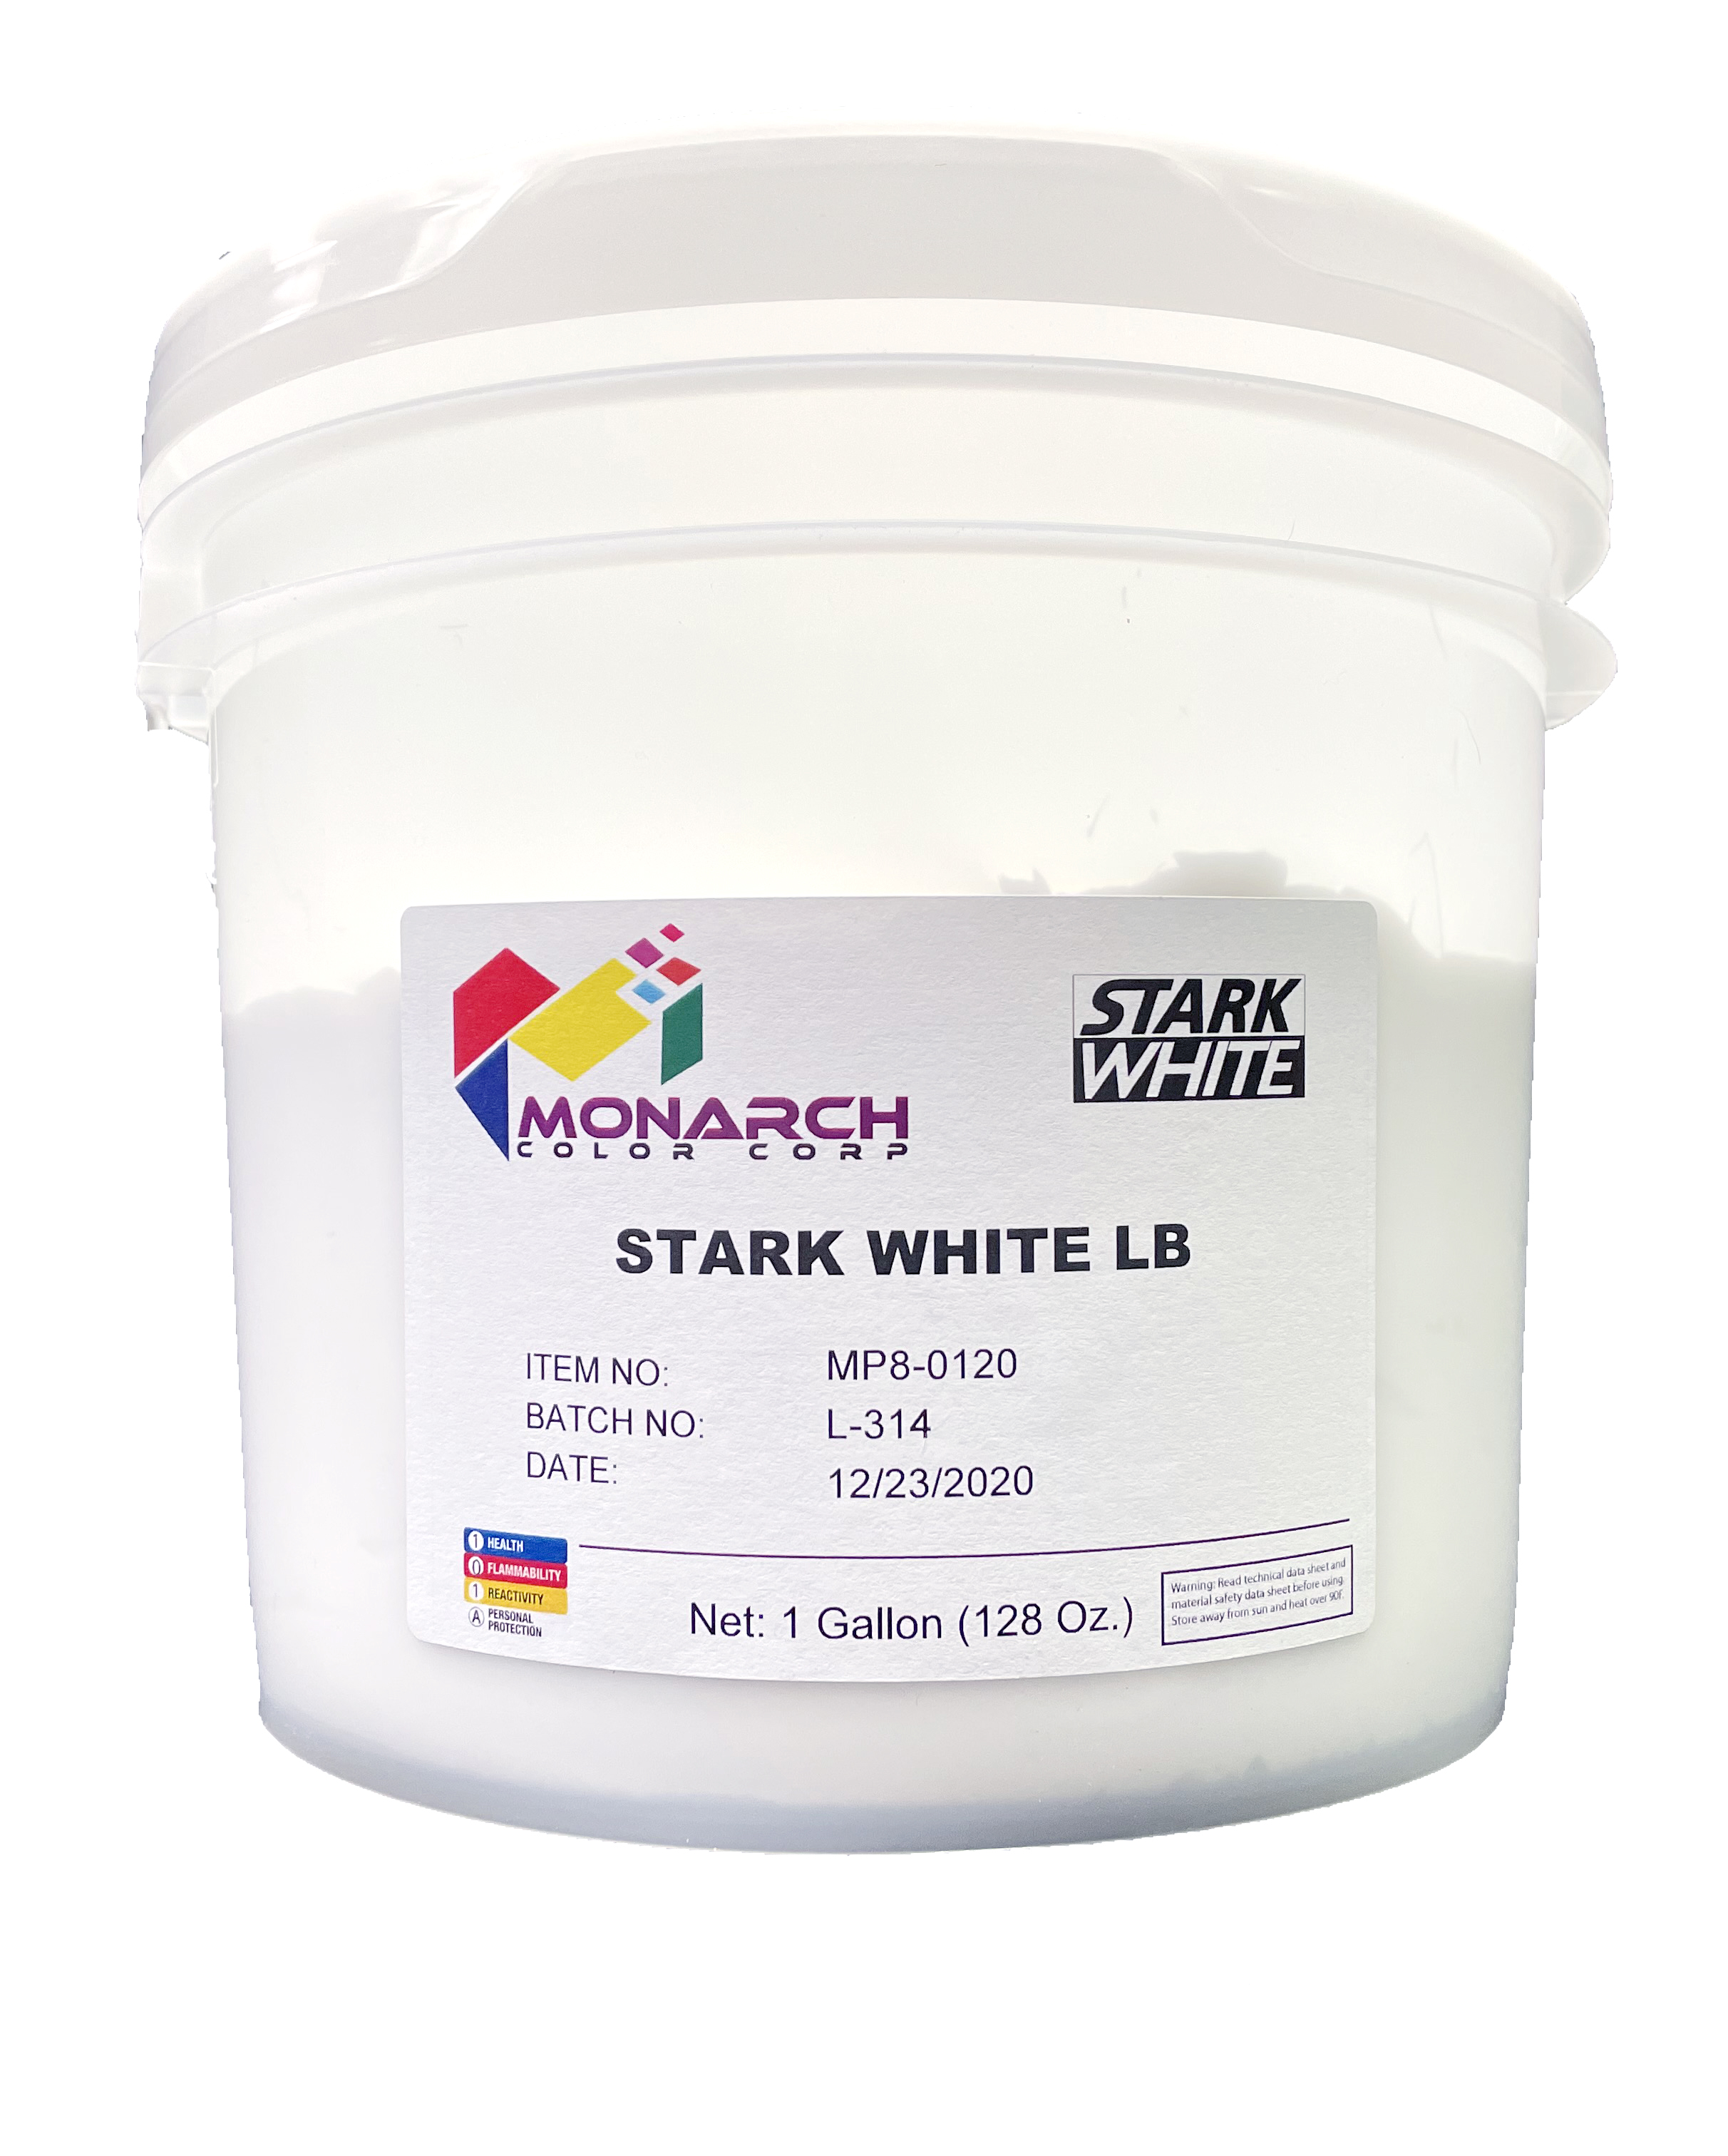 Stark LB White is a non-phthalate, lead free, High Opacity, bright, high performance white that has excellent coverage on dark garments. The low tack formula allows printing through finer mesh counts without the use of viscosity modifier. Stark LB White performs well on both automatic and manual presses. Has good bleed resistance for printing on polyester blends.